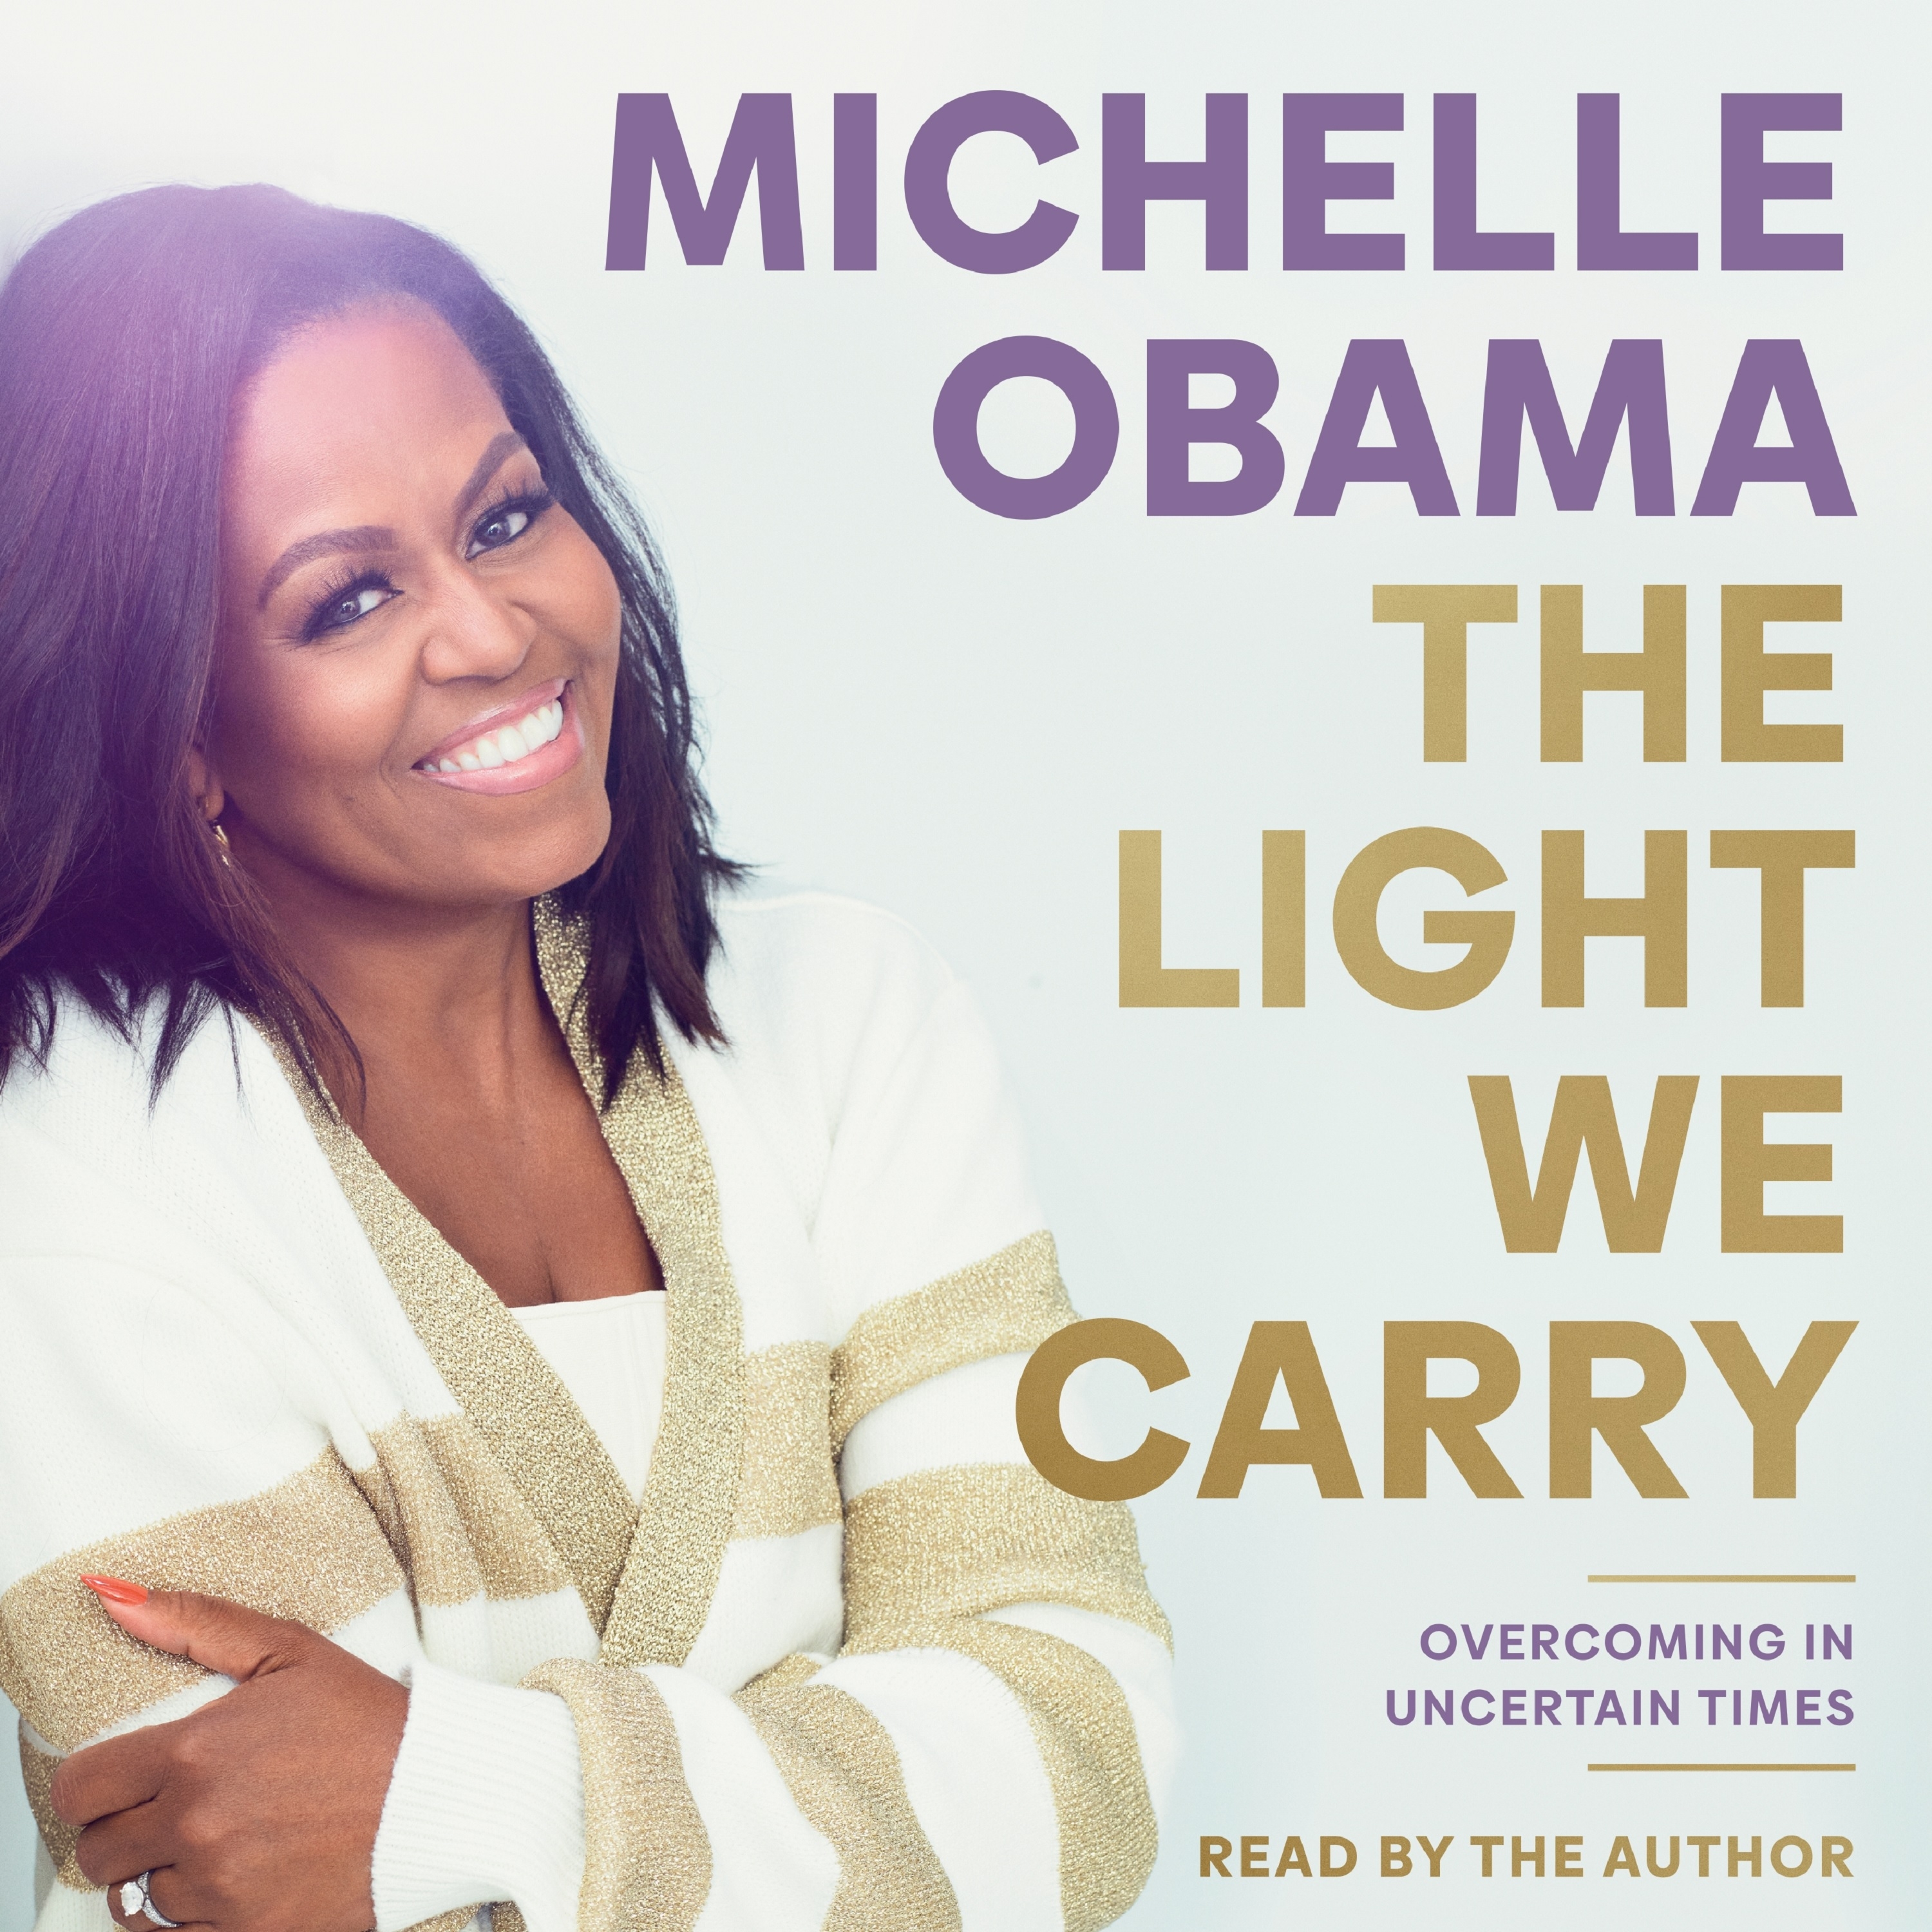 Audiobook image: Grey background with a photograph of Michelle Obama smiling on the left hand side. Her name, and the title of the book are stacked in blue and gold text on the right hand side.